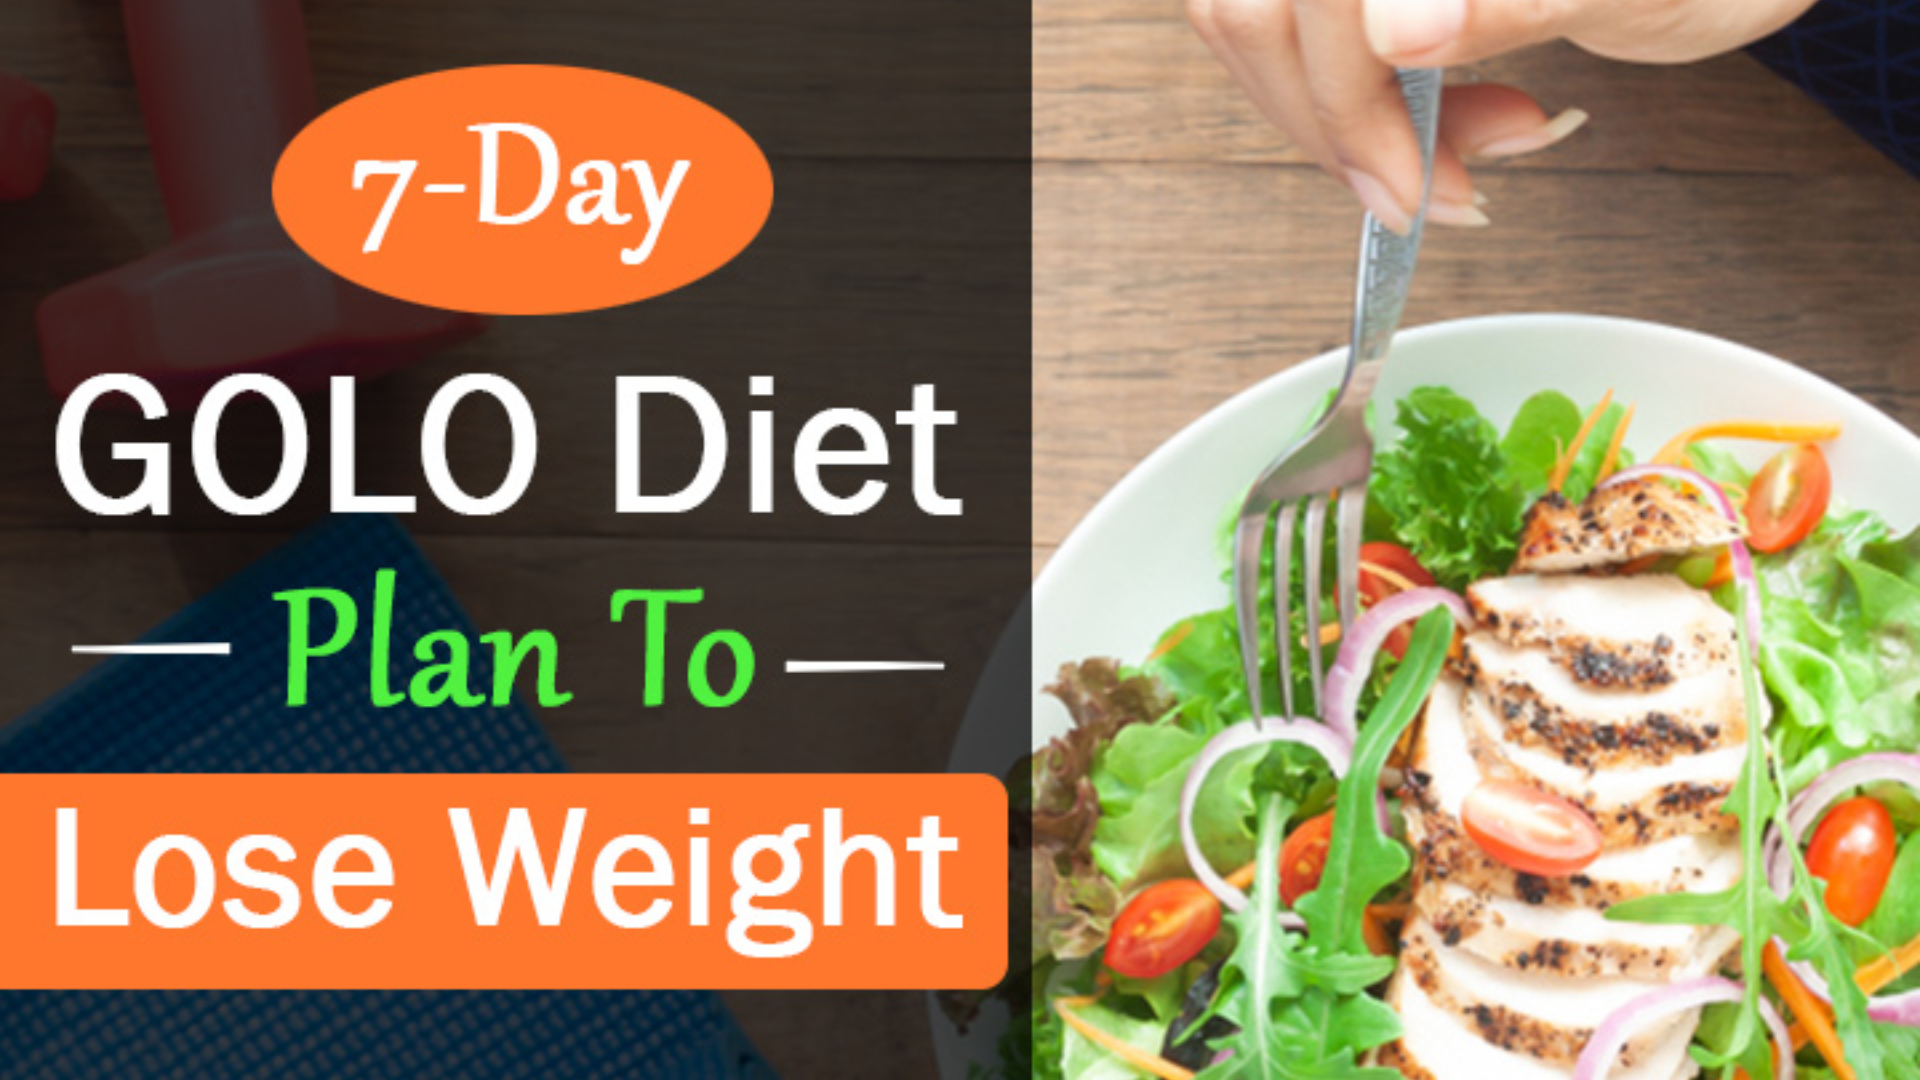 7-Day Golo Diet Plan to Lose Weight Effectively